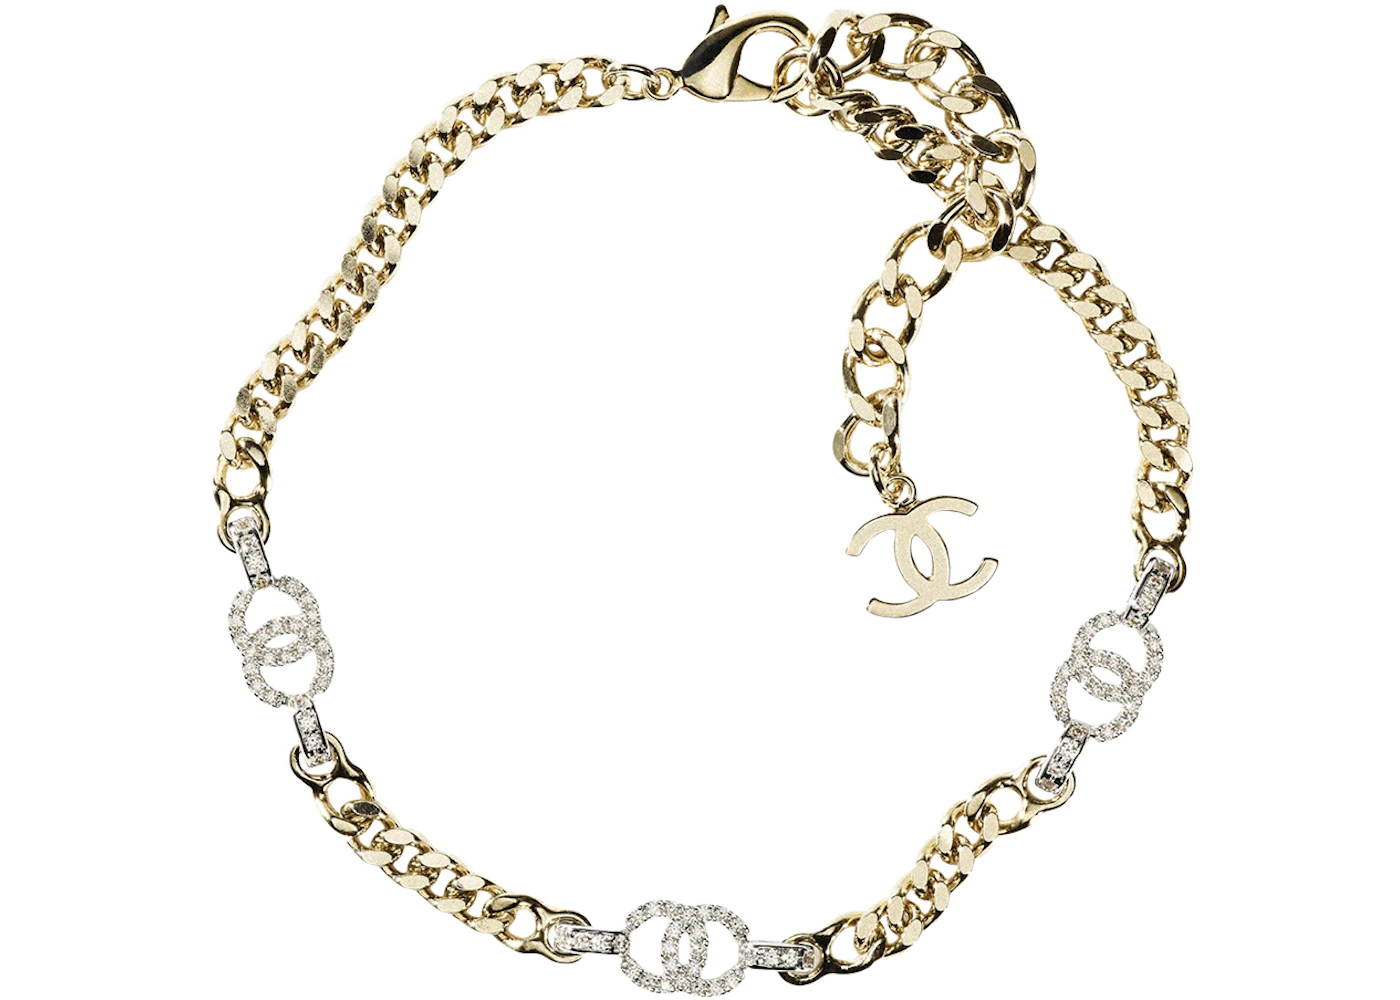 Chanel Choker Necklace AB8287 Gold/Silver/Crystal in Metal/Crystal